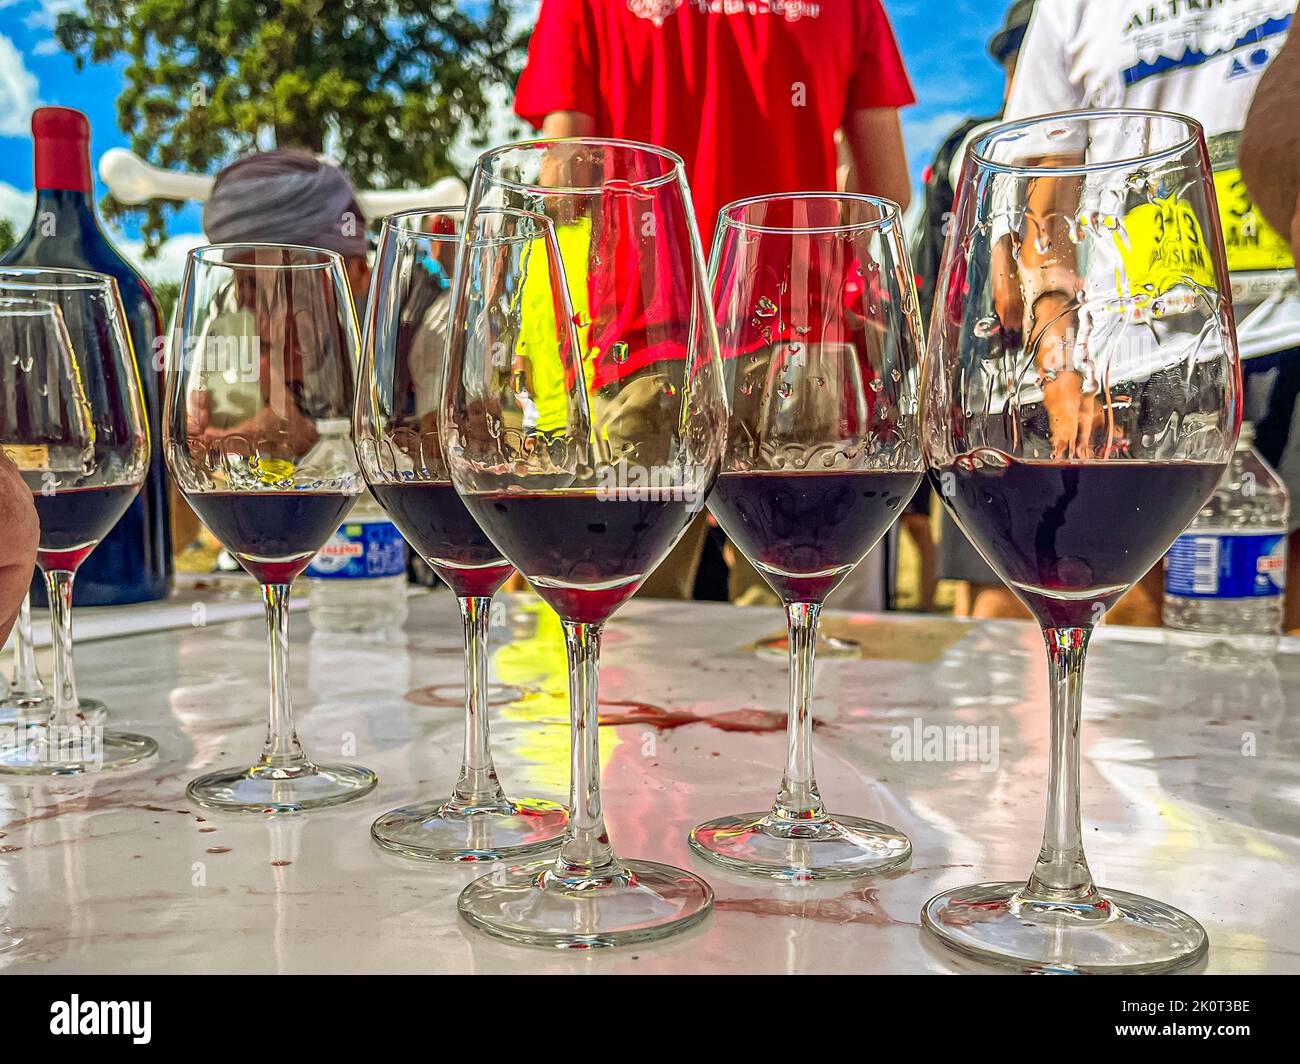 With so many tears, there's not a dry eye in the world. Things are done in style at Chateau Phelan Segur. Here, the participants of the 36th Marathon des Chateaux du Medoc are served red wine in glasses Stock Photo